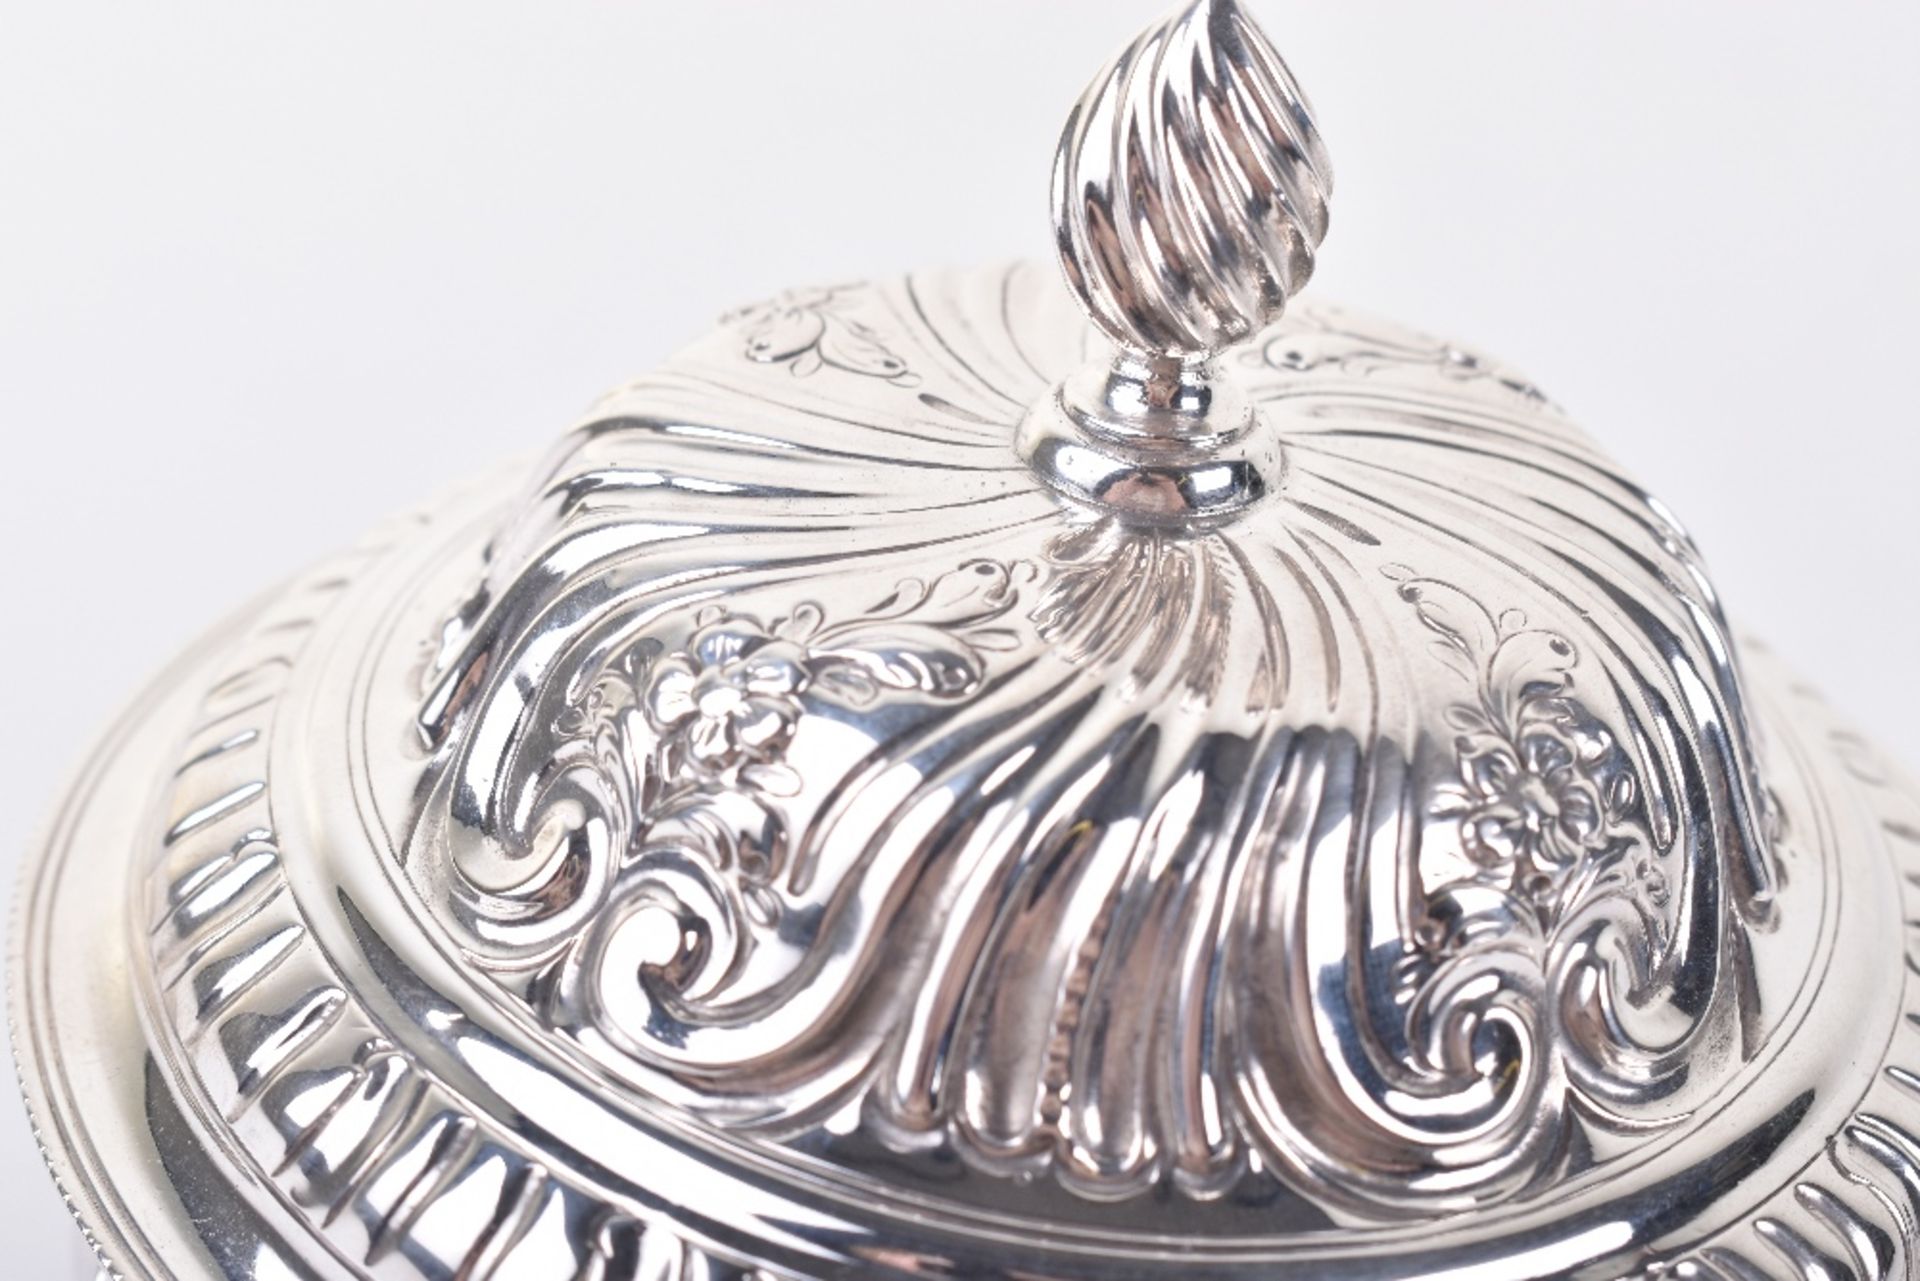 A George III silver sugar bowl and lid, William Plummer, London 1760 - Image 4 of 7